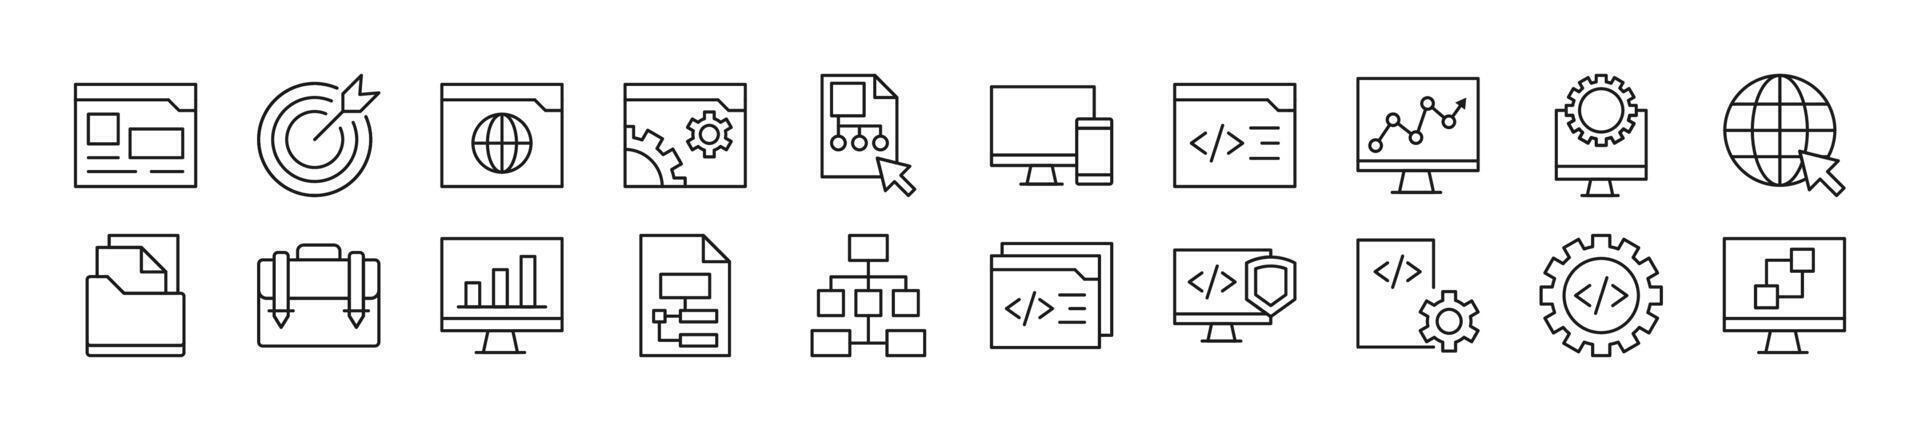 Set of line icons of programming. Editable stroke. Simple outline sign for web sites, newspapers, articles book vector